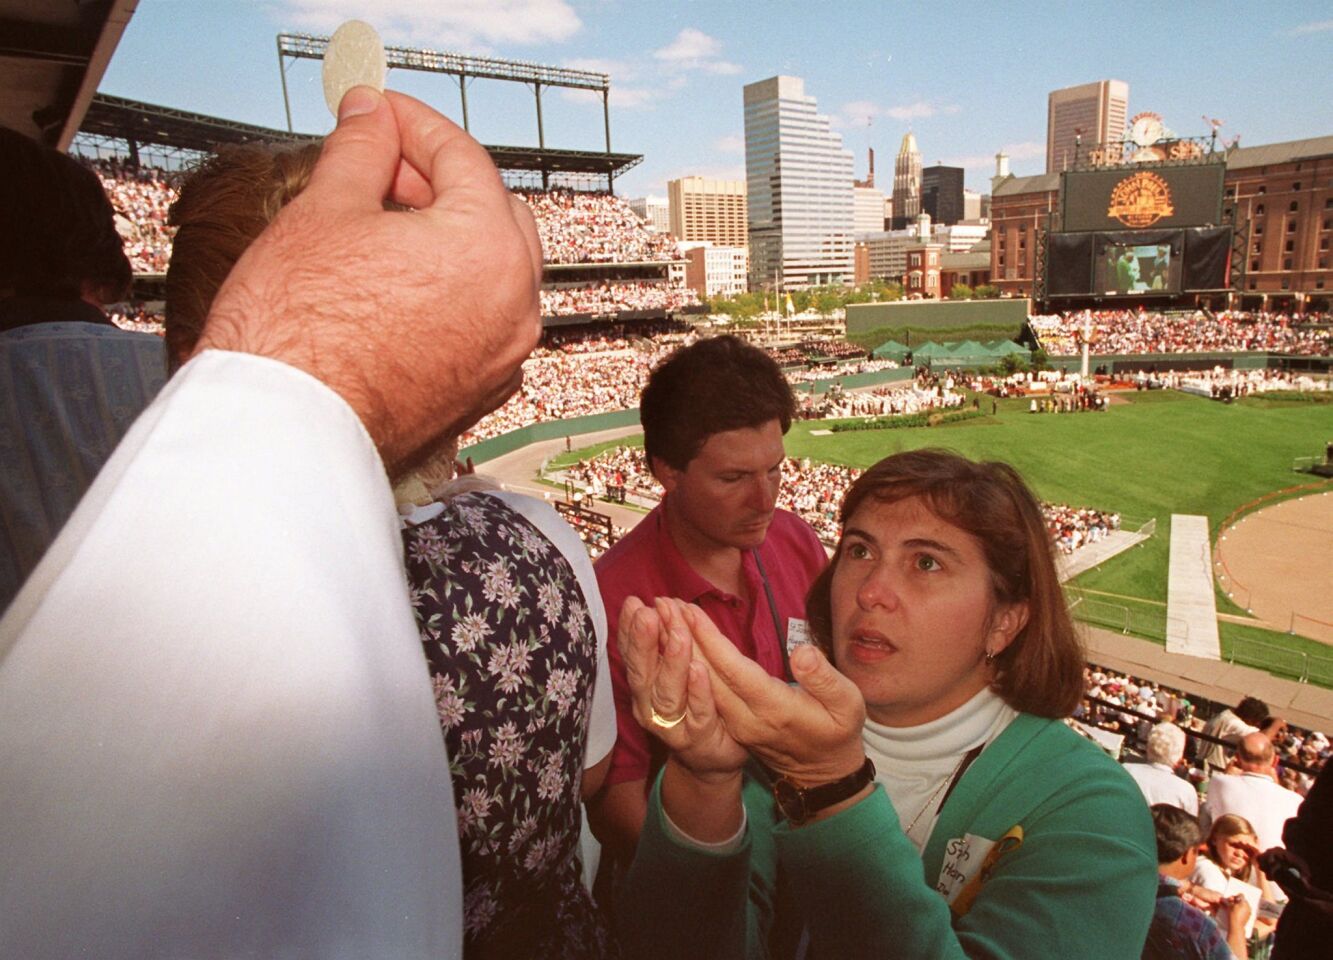 During Pope John Paul II's visit to Baltimore, attendees at a papal Mass in Camden Yards receive Communion.